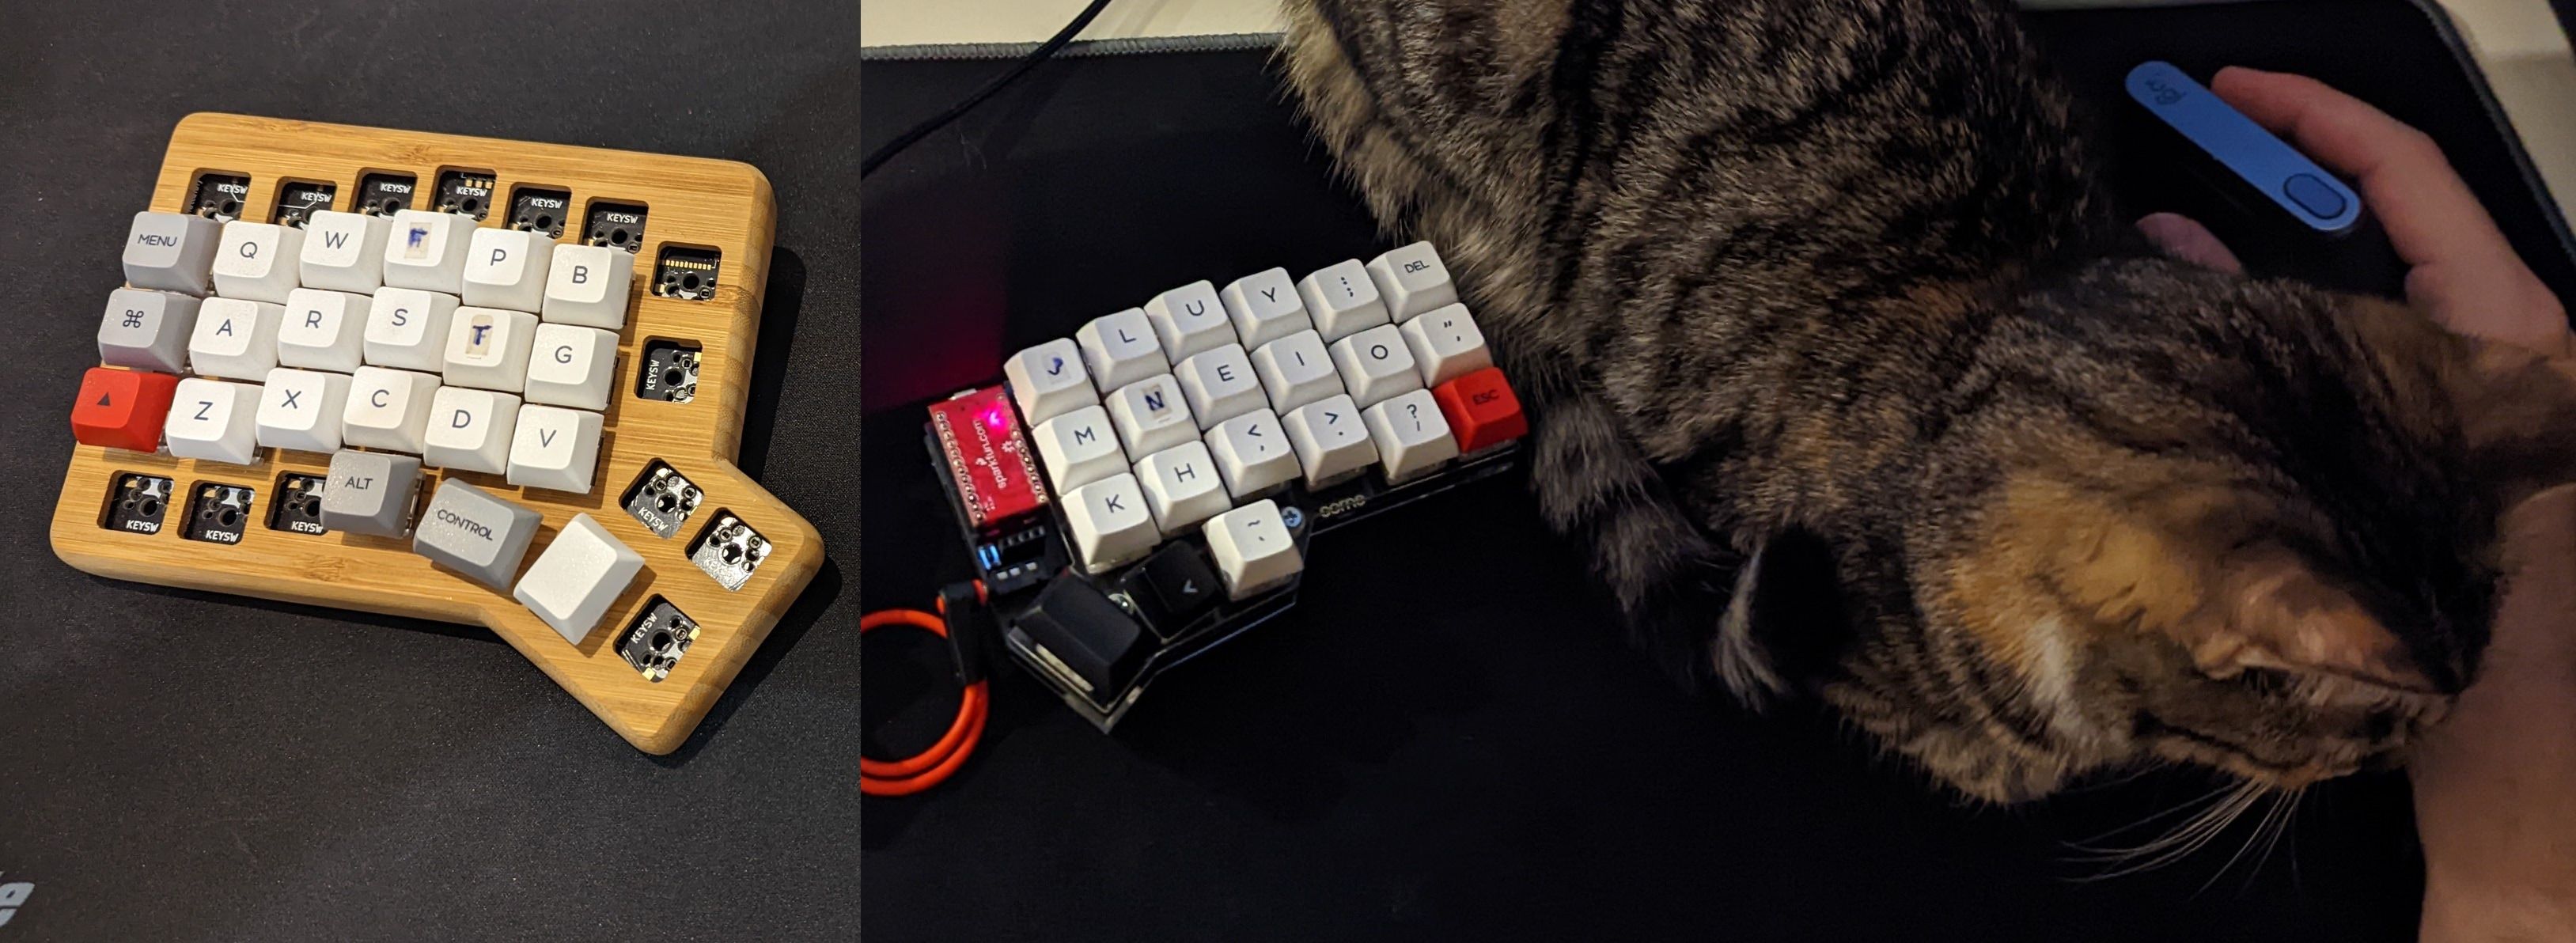 Test of the next desired key layout still on an old keyboard